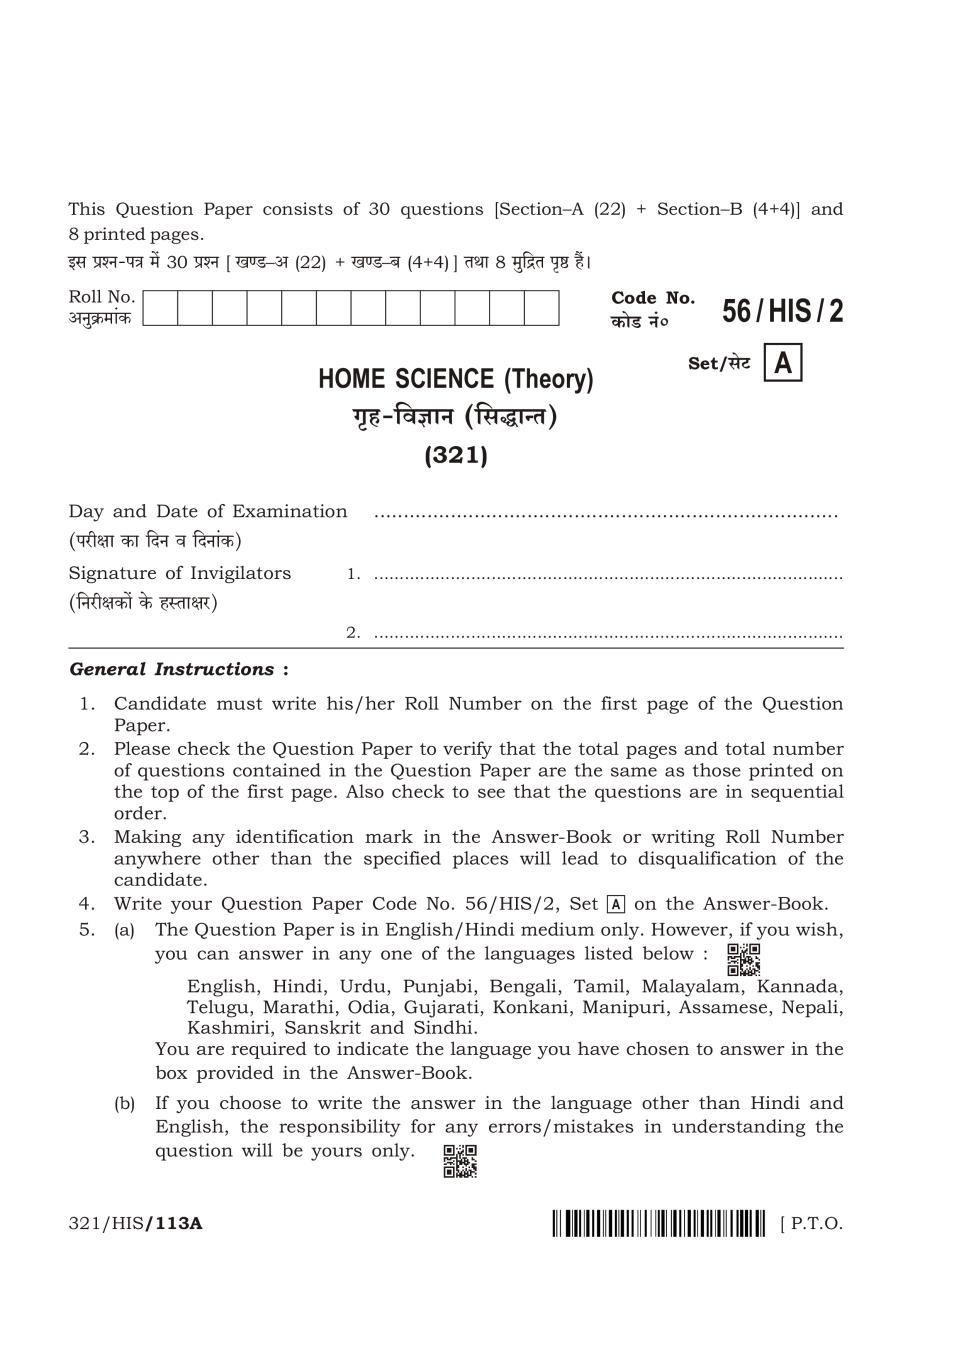 NIOS Class 12 Question Paper Apr 2018 - Home Science - Page 1